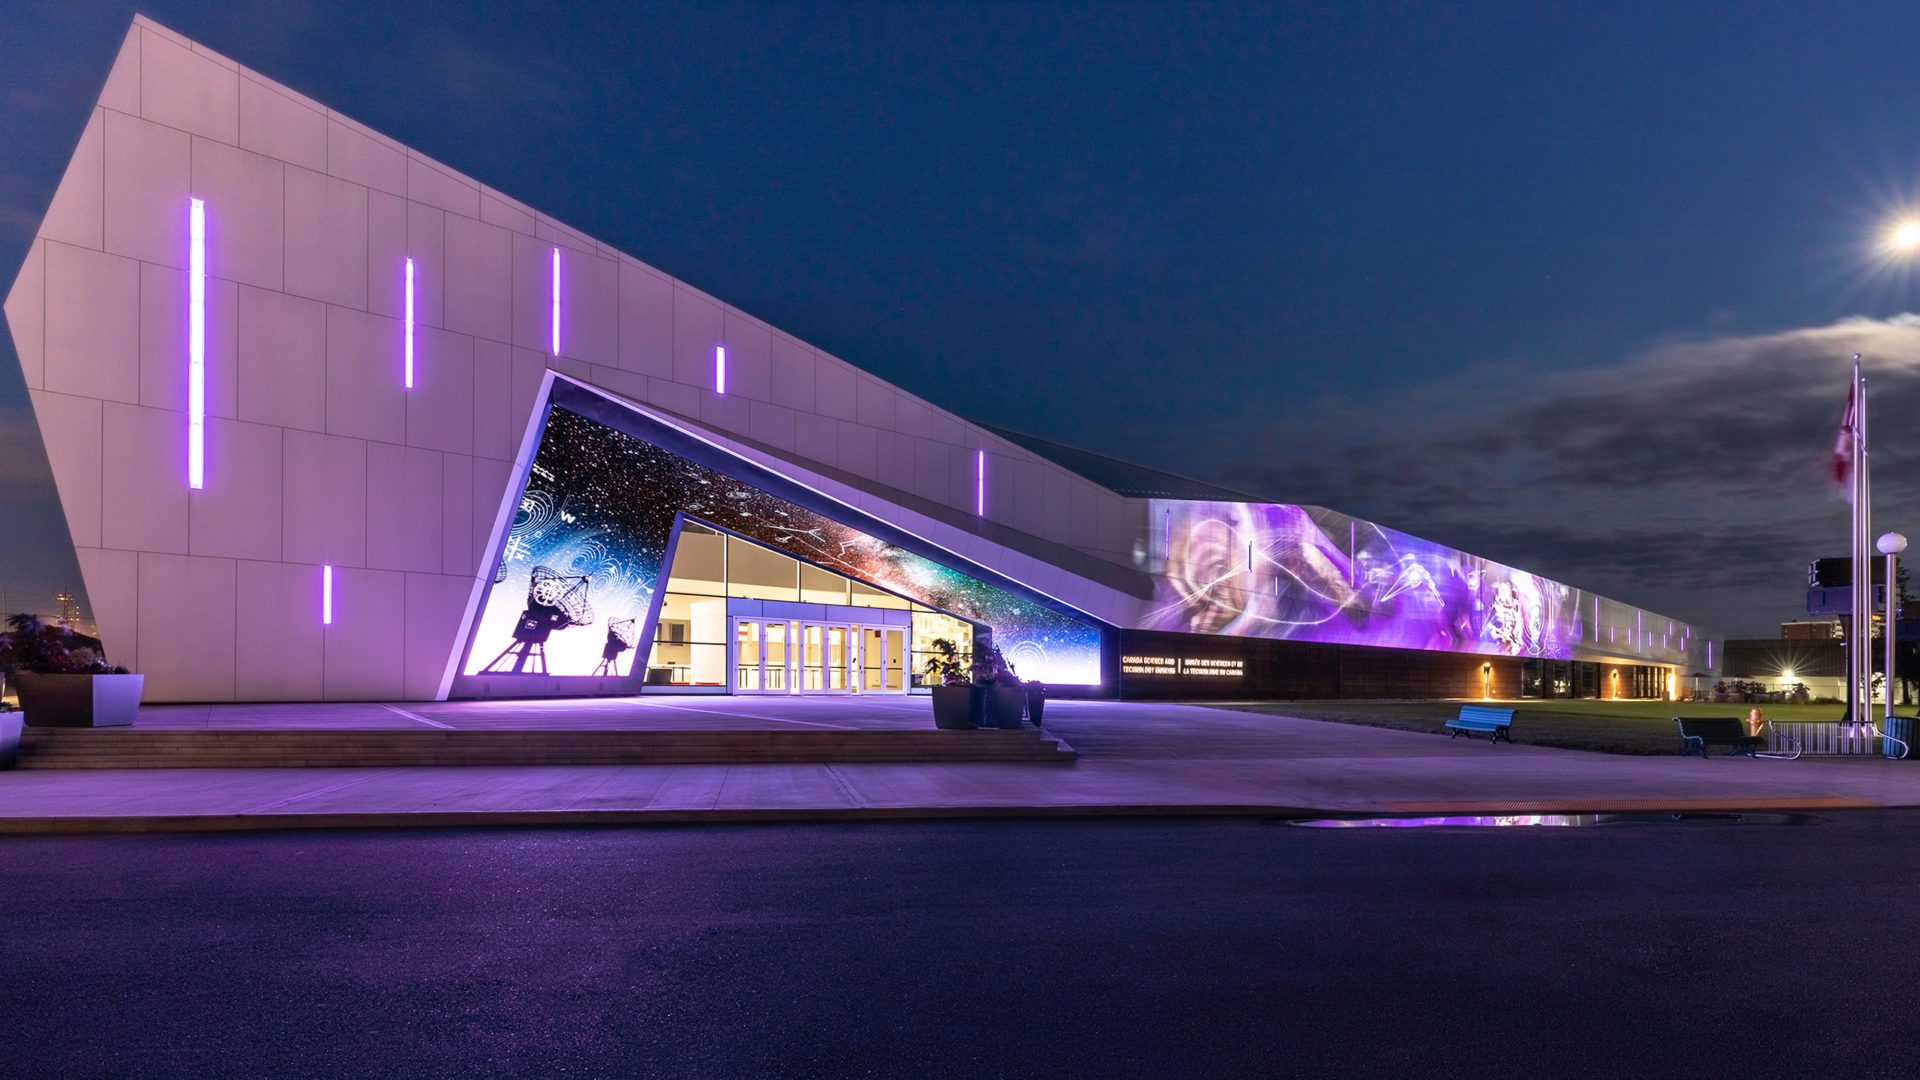 nighttime exterior image of public building canada science and technology museum in ottawa ontario